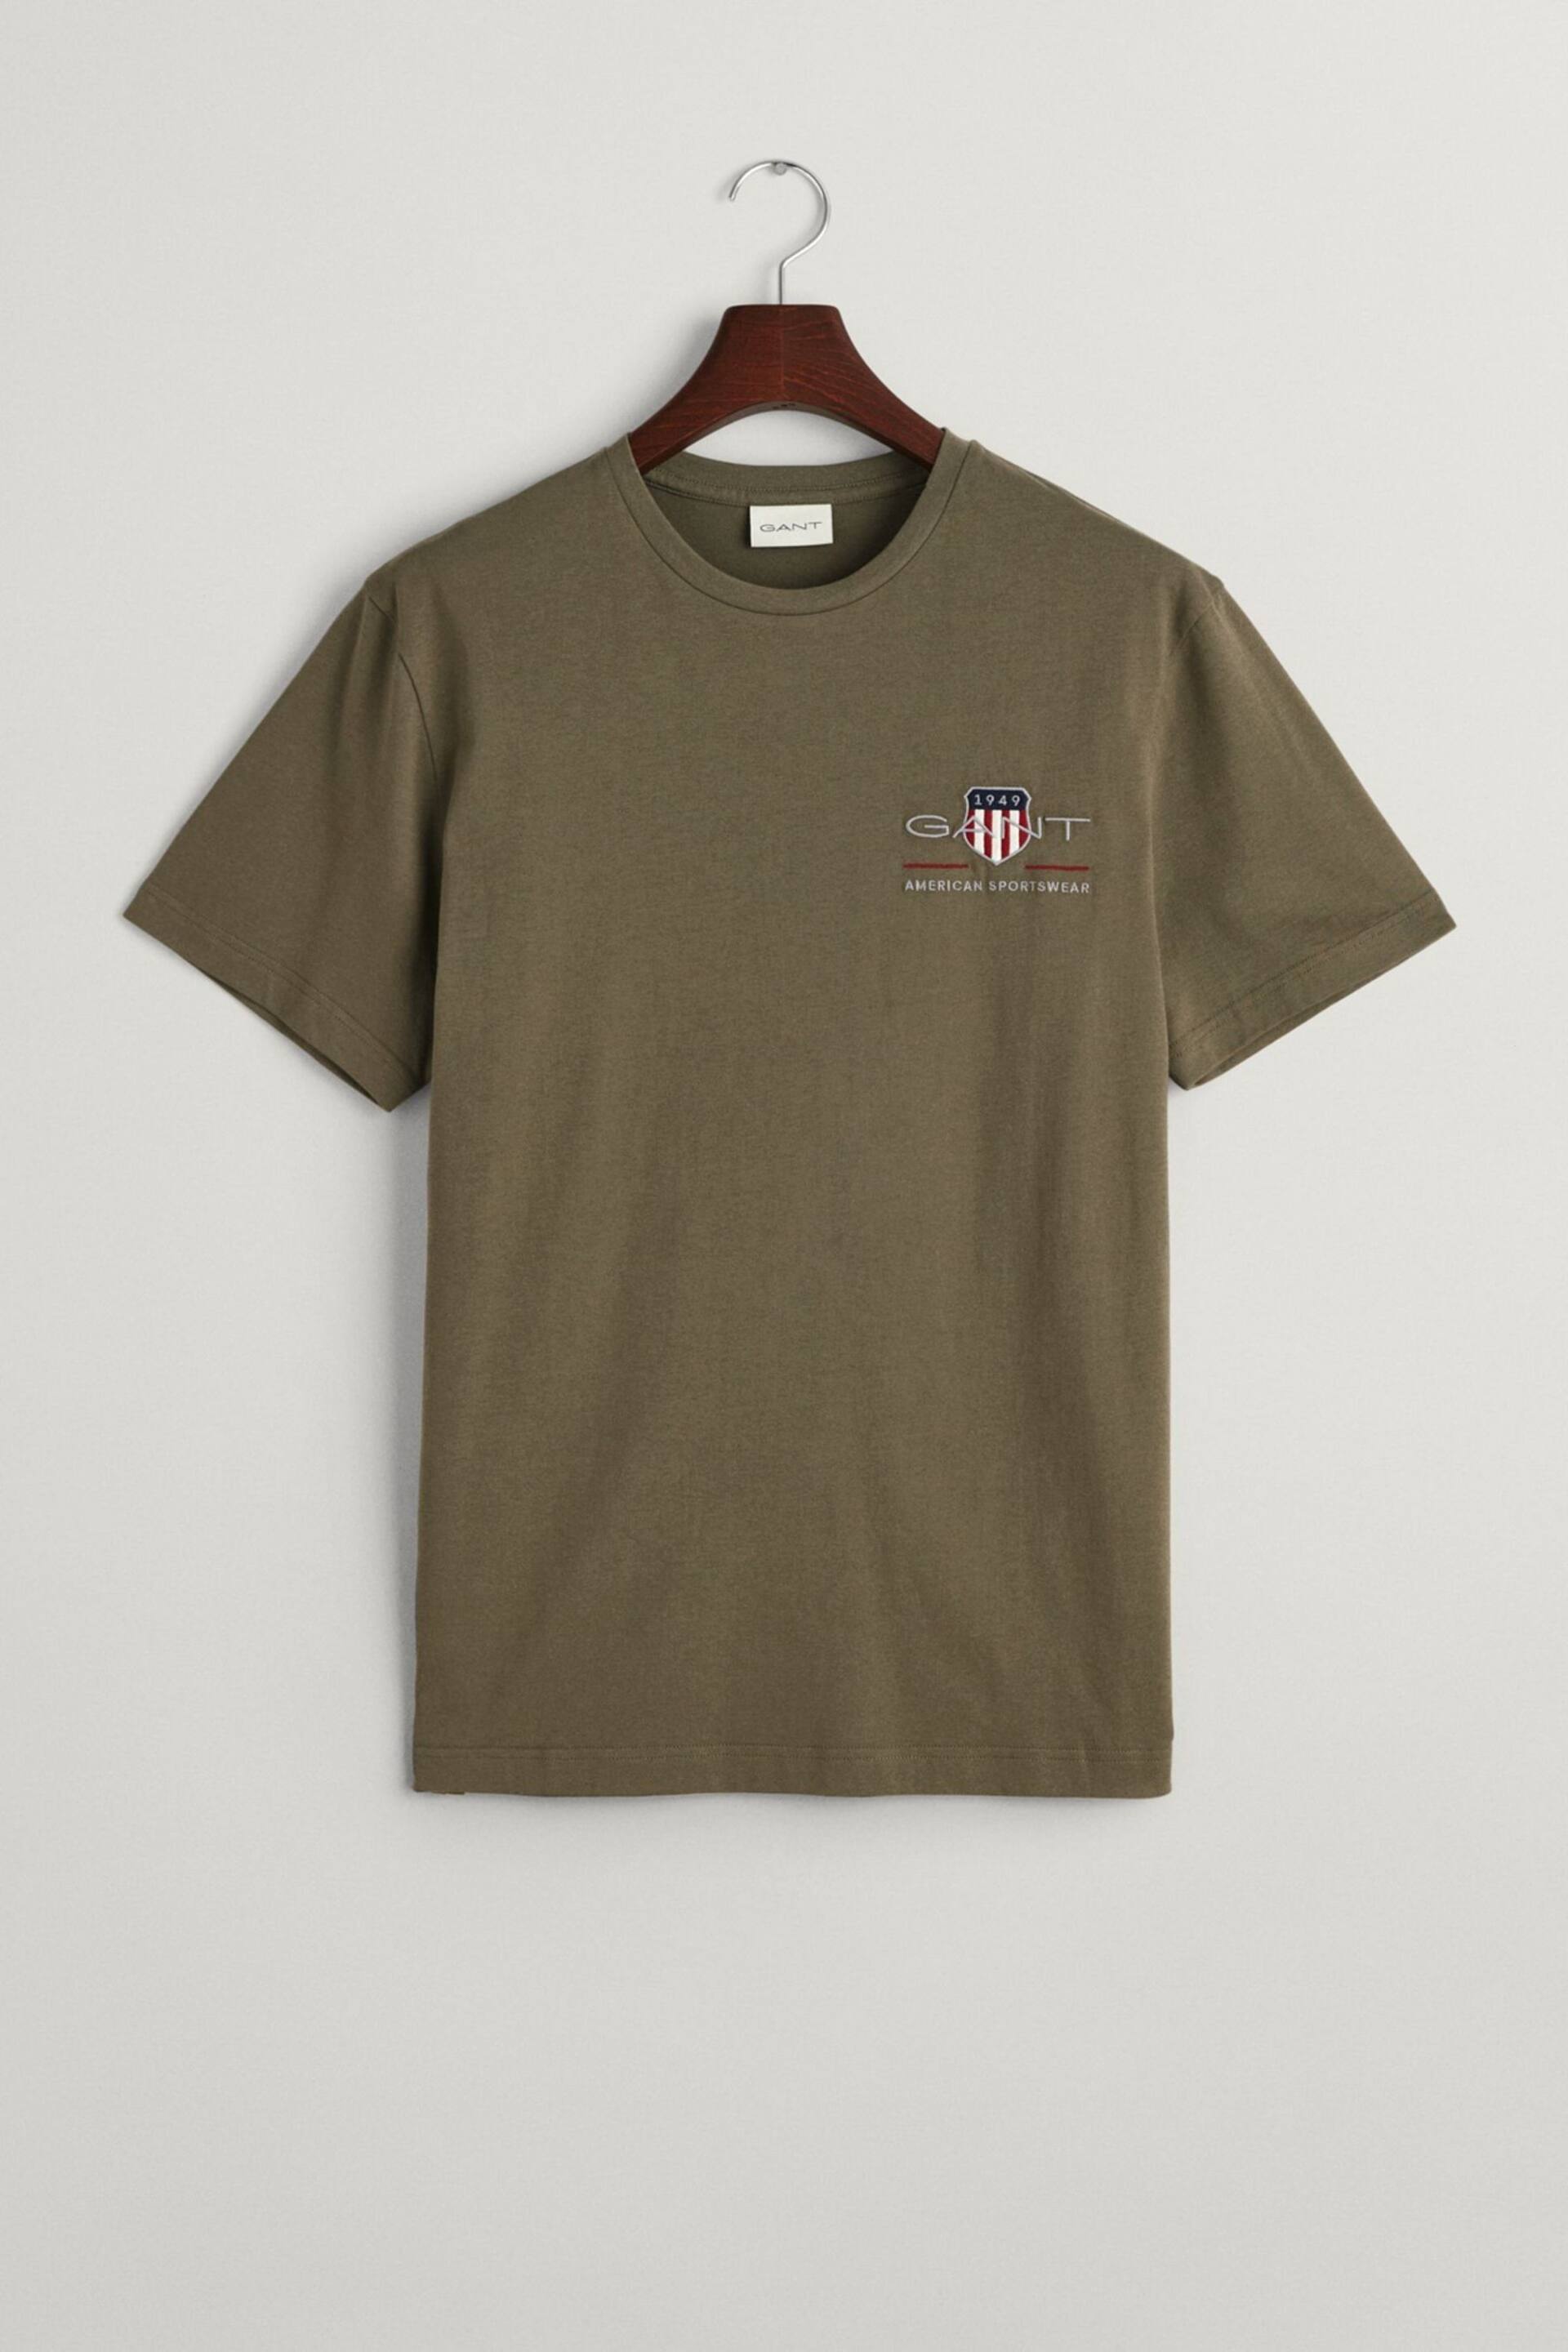 GANT Embroidered Archive Shield T-Shirt - Image 5 of 5